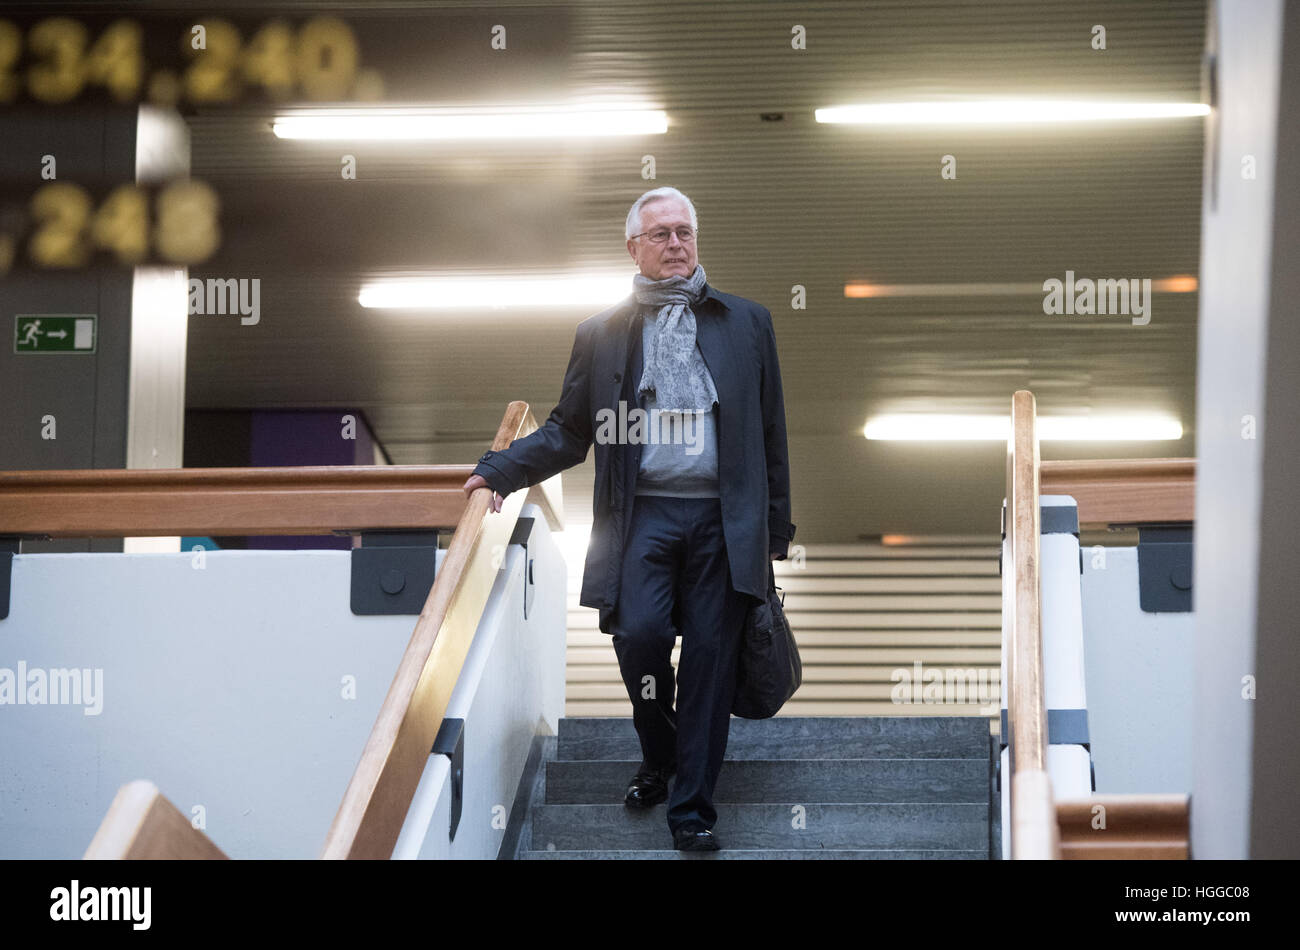 Bochum, Germany. 9th Jan, 2017. Former chancellery minister Bernd Schidbauer enters the district court for his witness statement in Bochum, Germany, 9 January 2017. The tax trial against the legendary ex-agent Mauss concerns an alleged secret fonds which financed his missions. Photo: Bernd Thissen/dpa/Alamy Live News Stock Photo